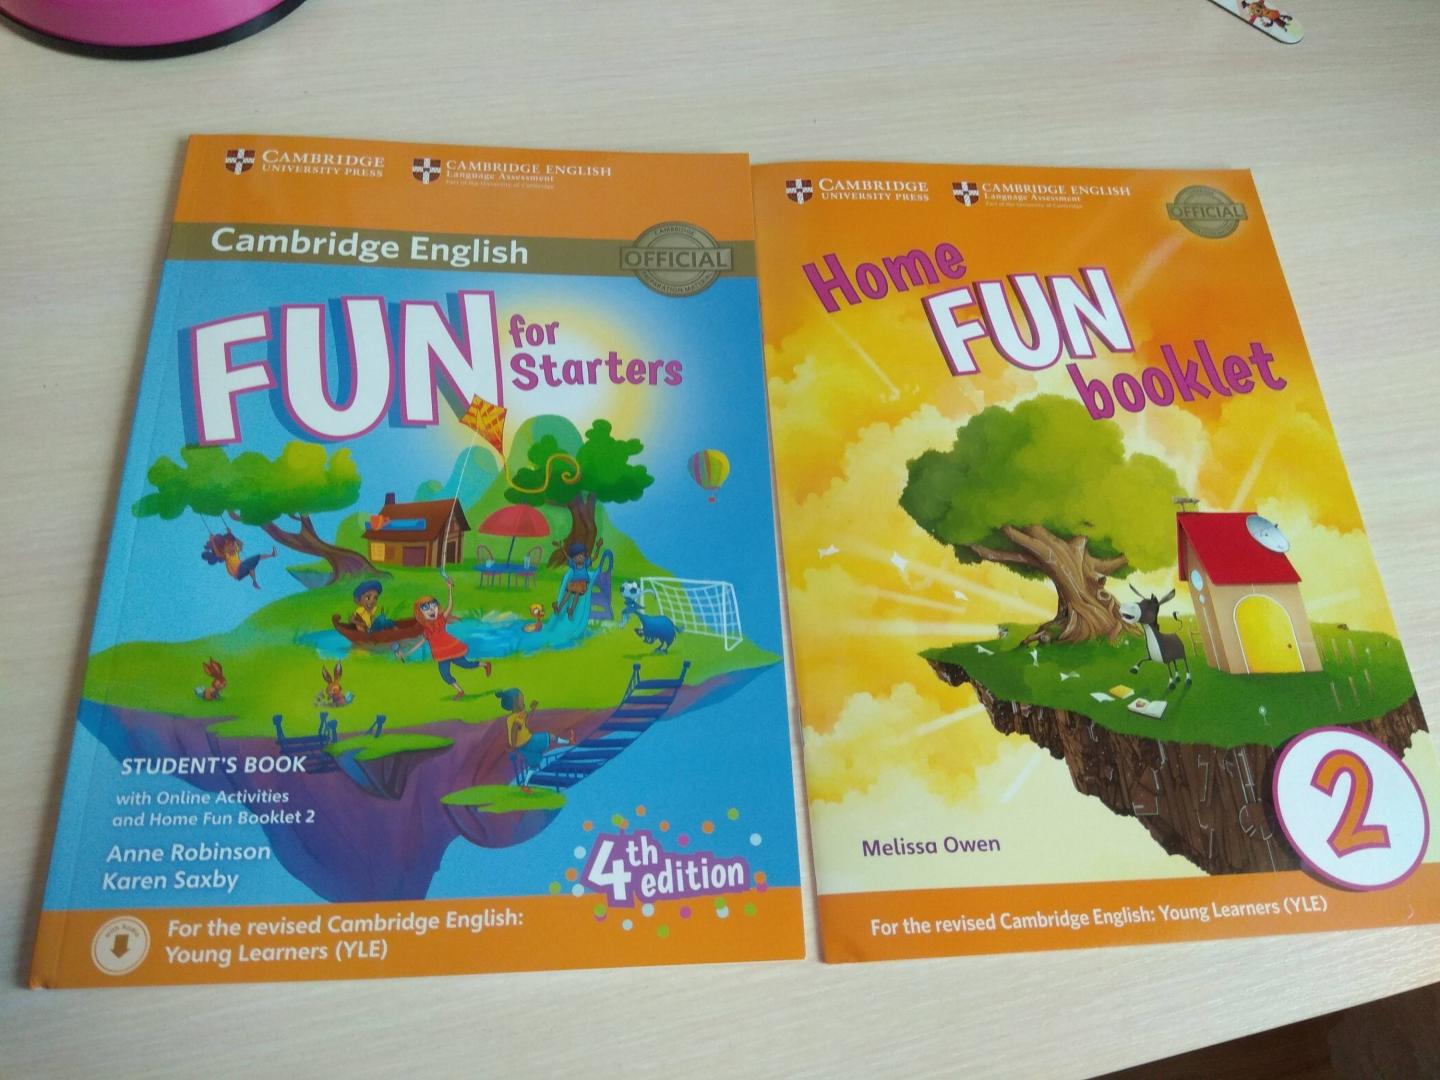 Home fun booklet. Fun for Starters Workbook Cambridge. Учебник fun for Starters. Учебник Flyers. Fun учебник по английскому языку.